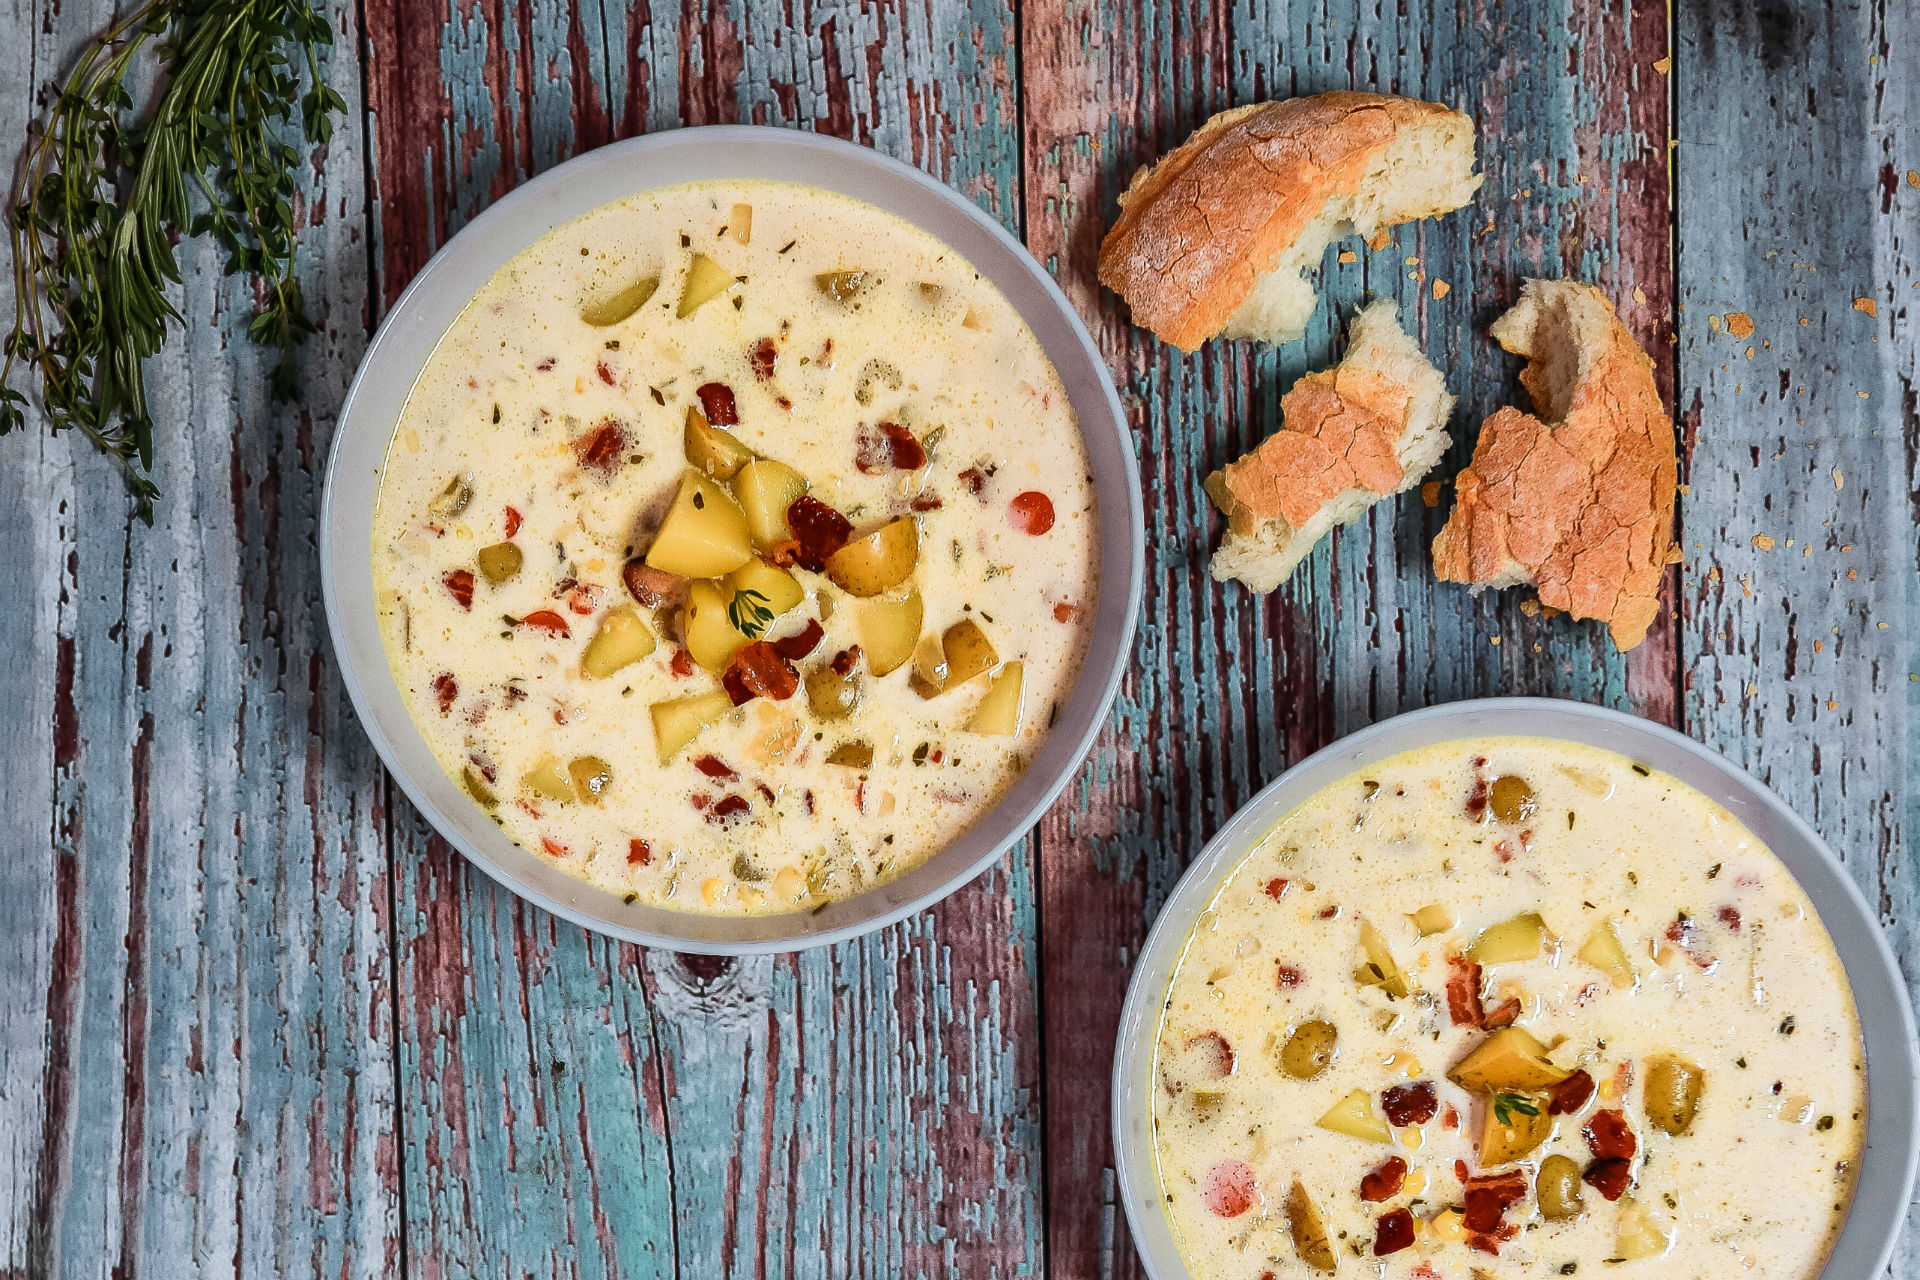 corn chowder with bread on the side